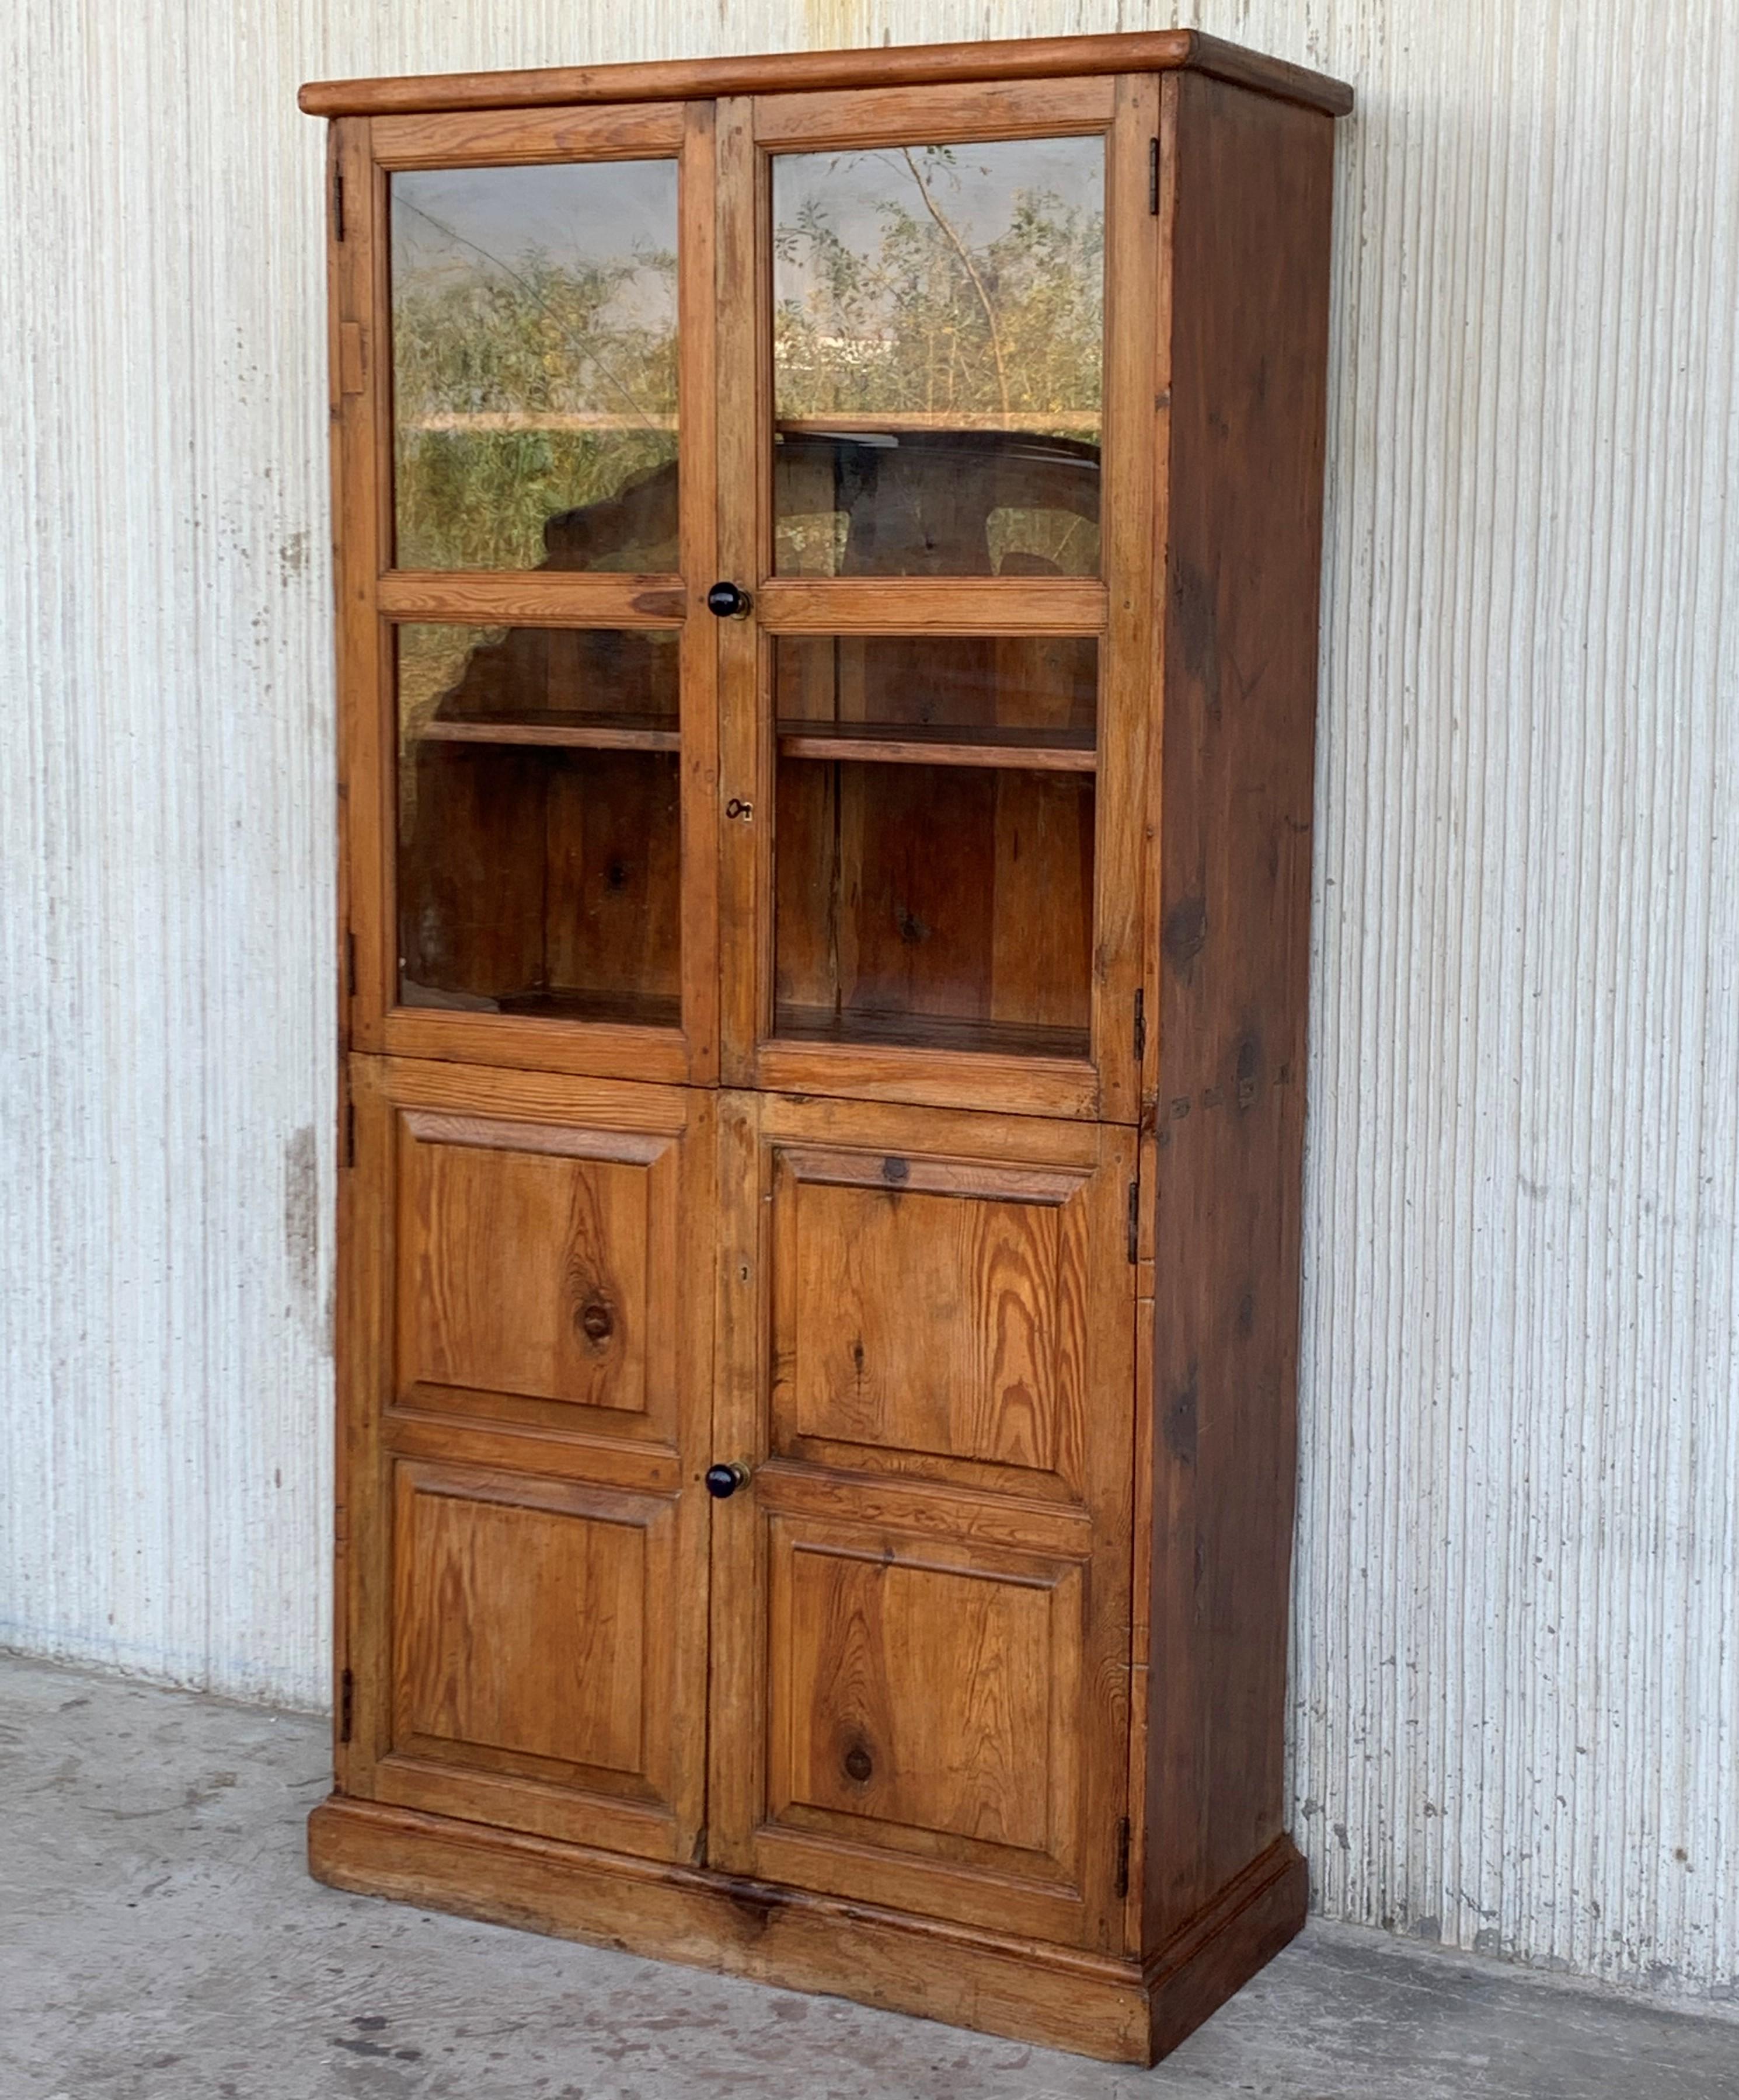 19th century Spanish cupboard or bookcase with glass vitrine, constructed from a pine called 